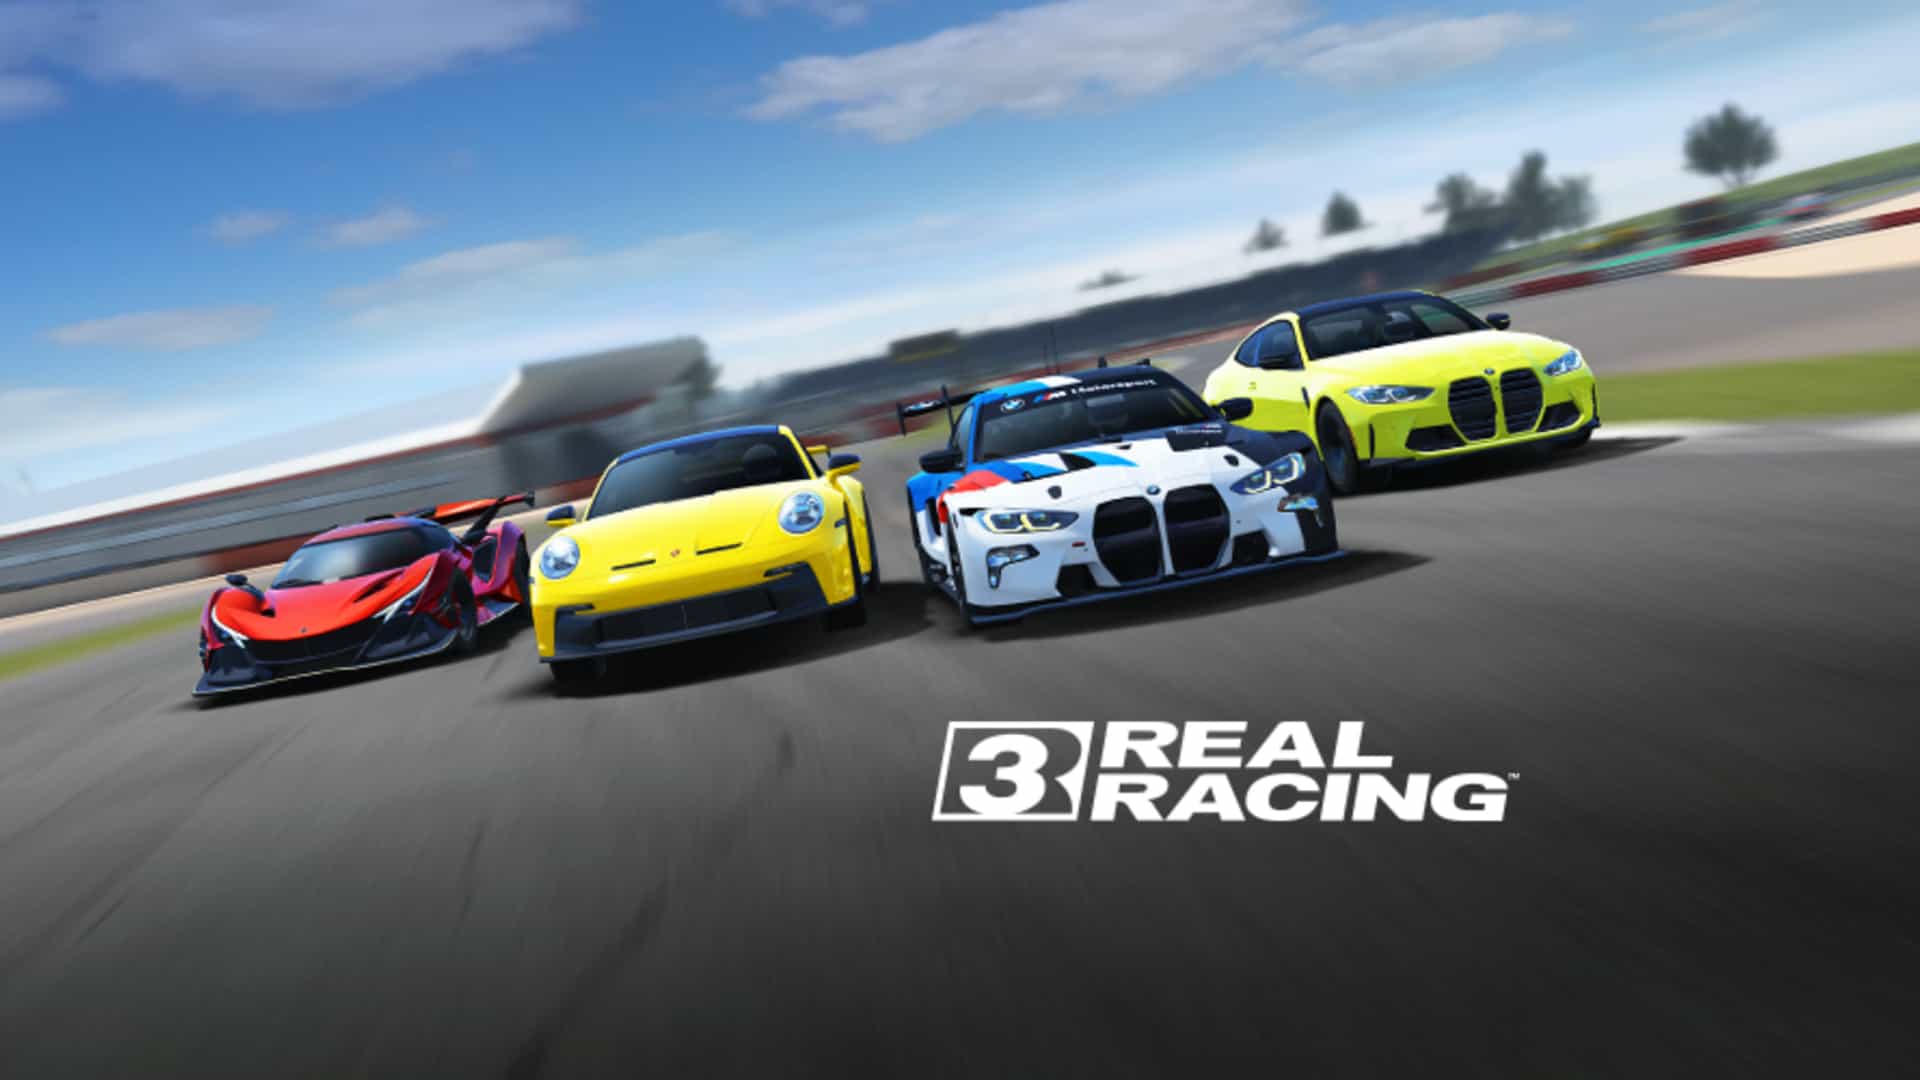 Two BMW M4s and new Porsche 911 GT3 join Real Racing 3 in update 10.2